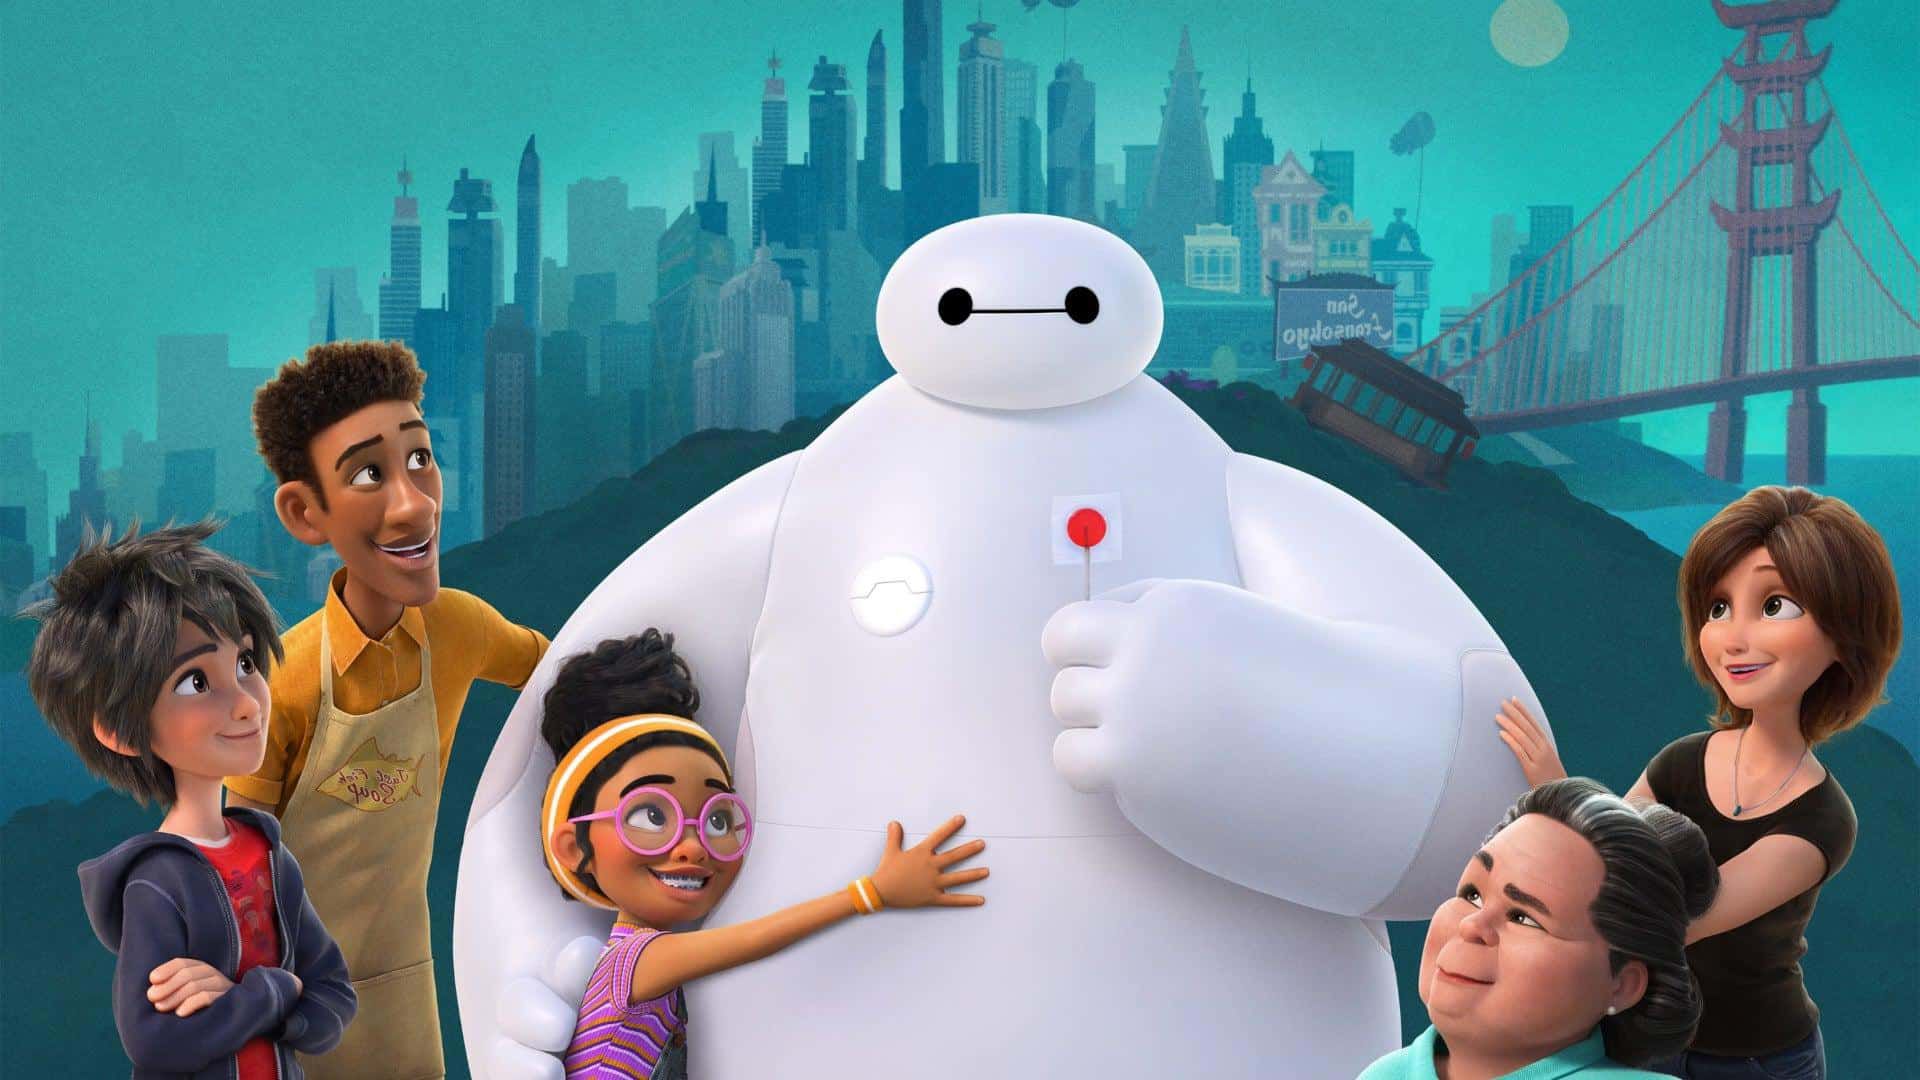 Baymax! Season 1 Review – Our Favourite Healthcare Robot Returns